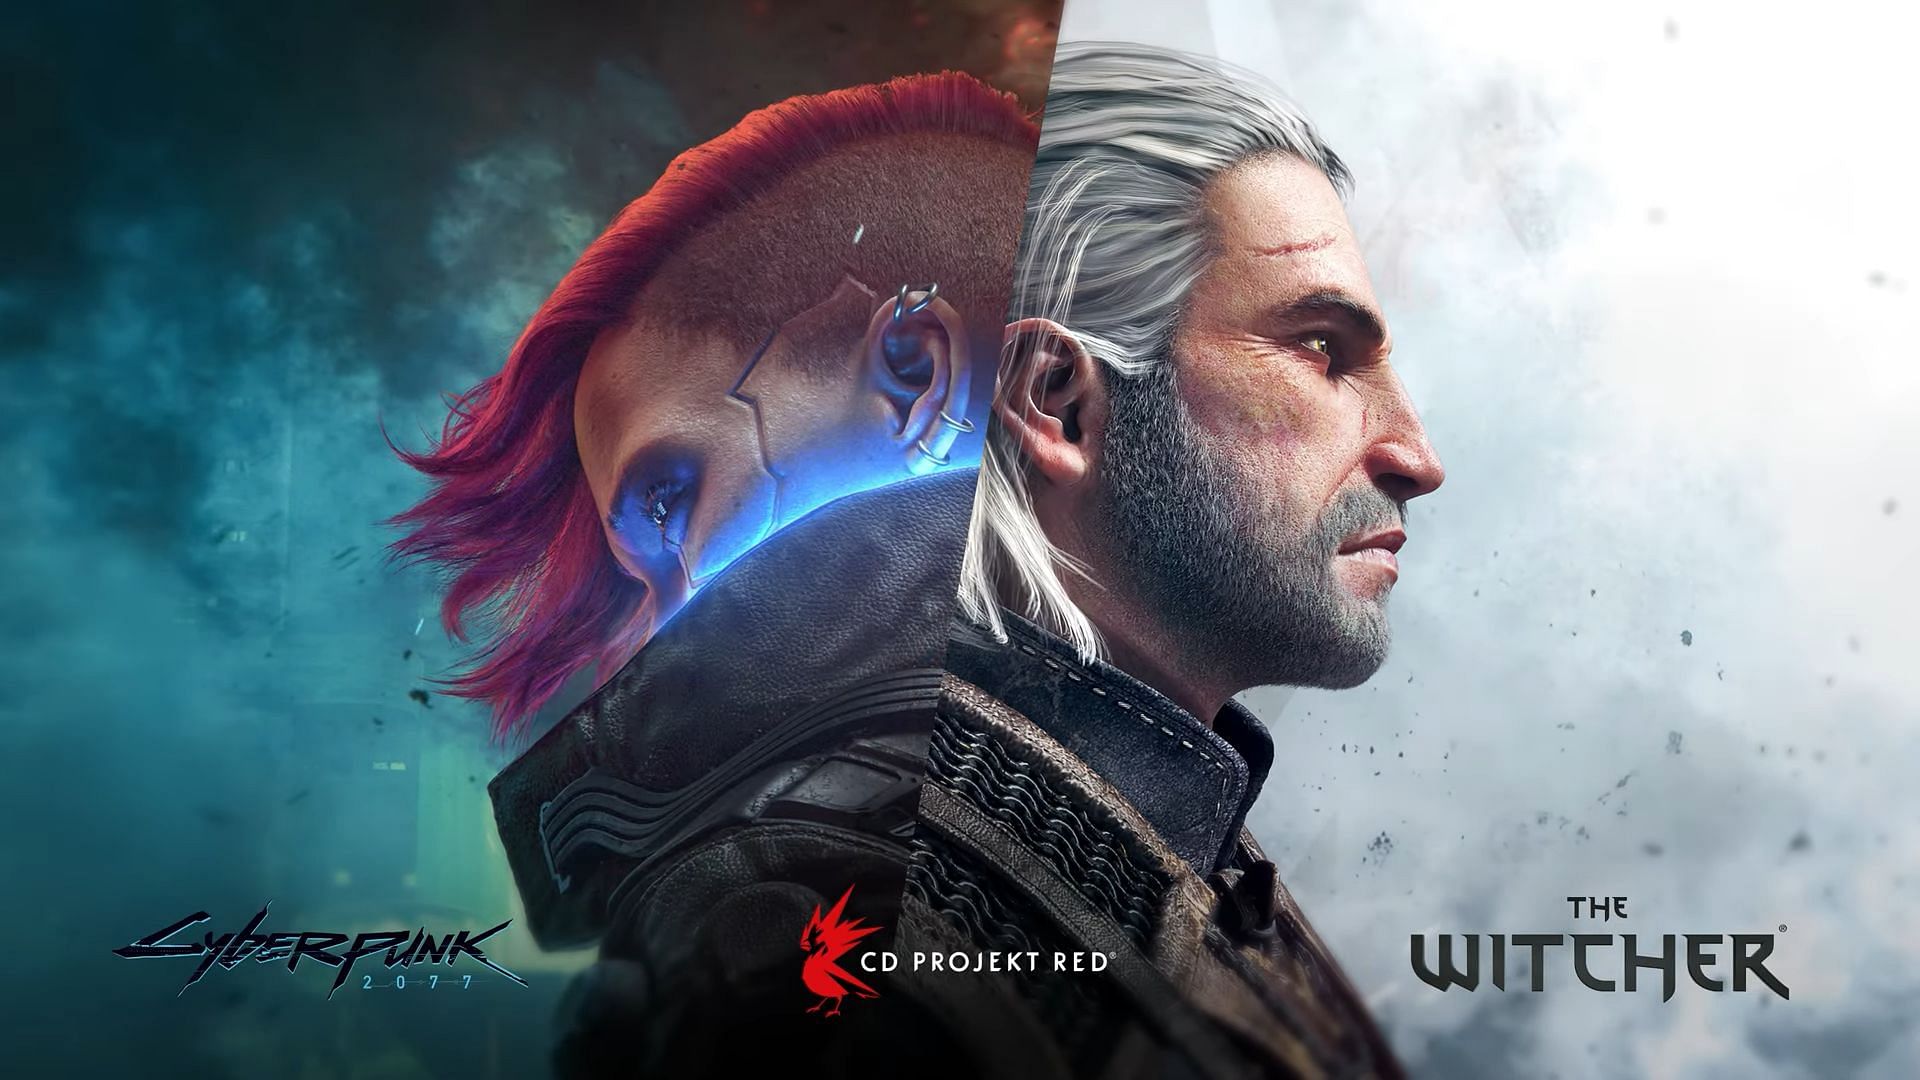 The future of Cyberpunk and Witcher (Image via CD Projekt Red)